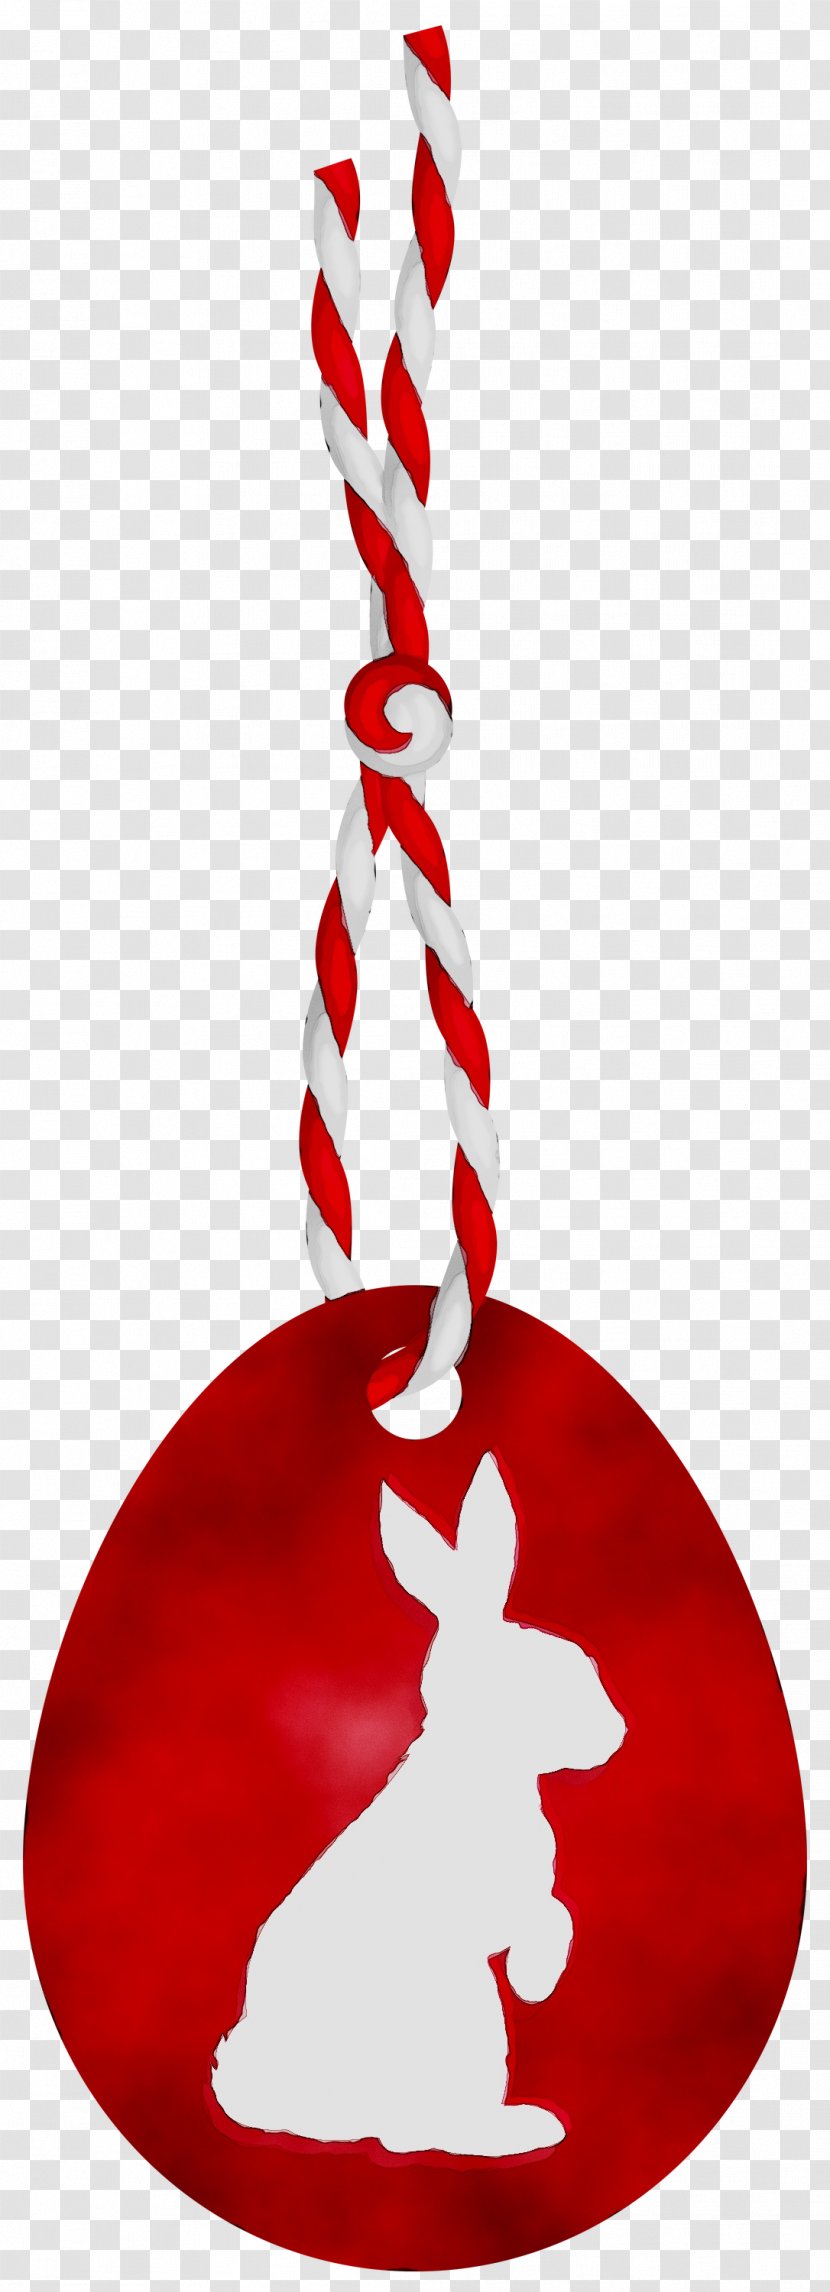 Christmas Tree Ornament Clip Art Day - Fictional Character Transparent PNG